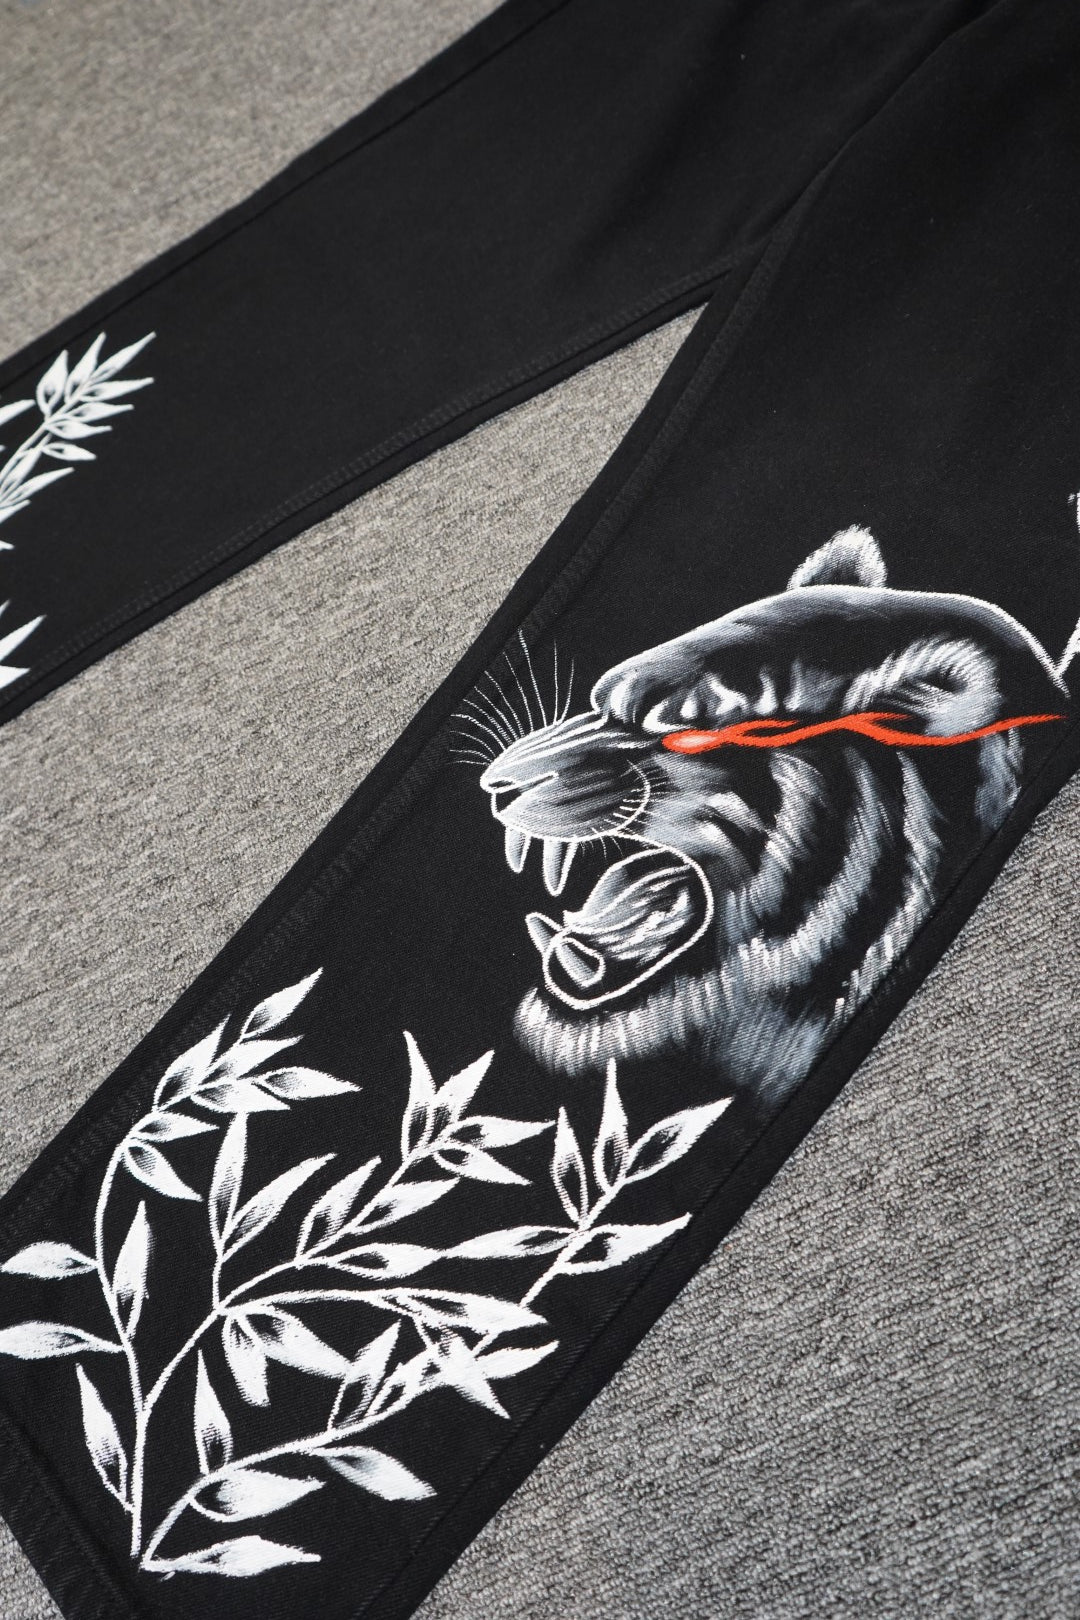 'EYE OF THE TIGER' VALKYRE JEANS